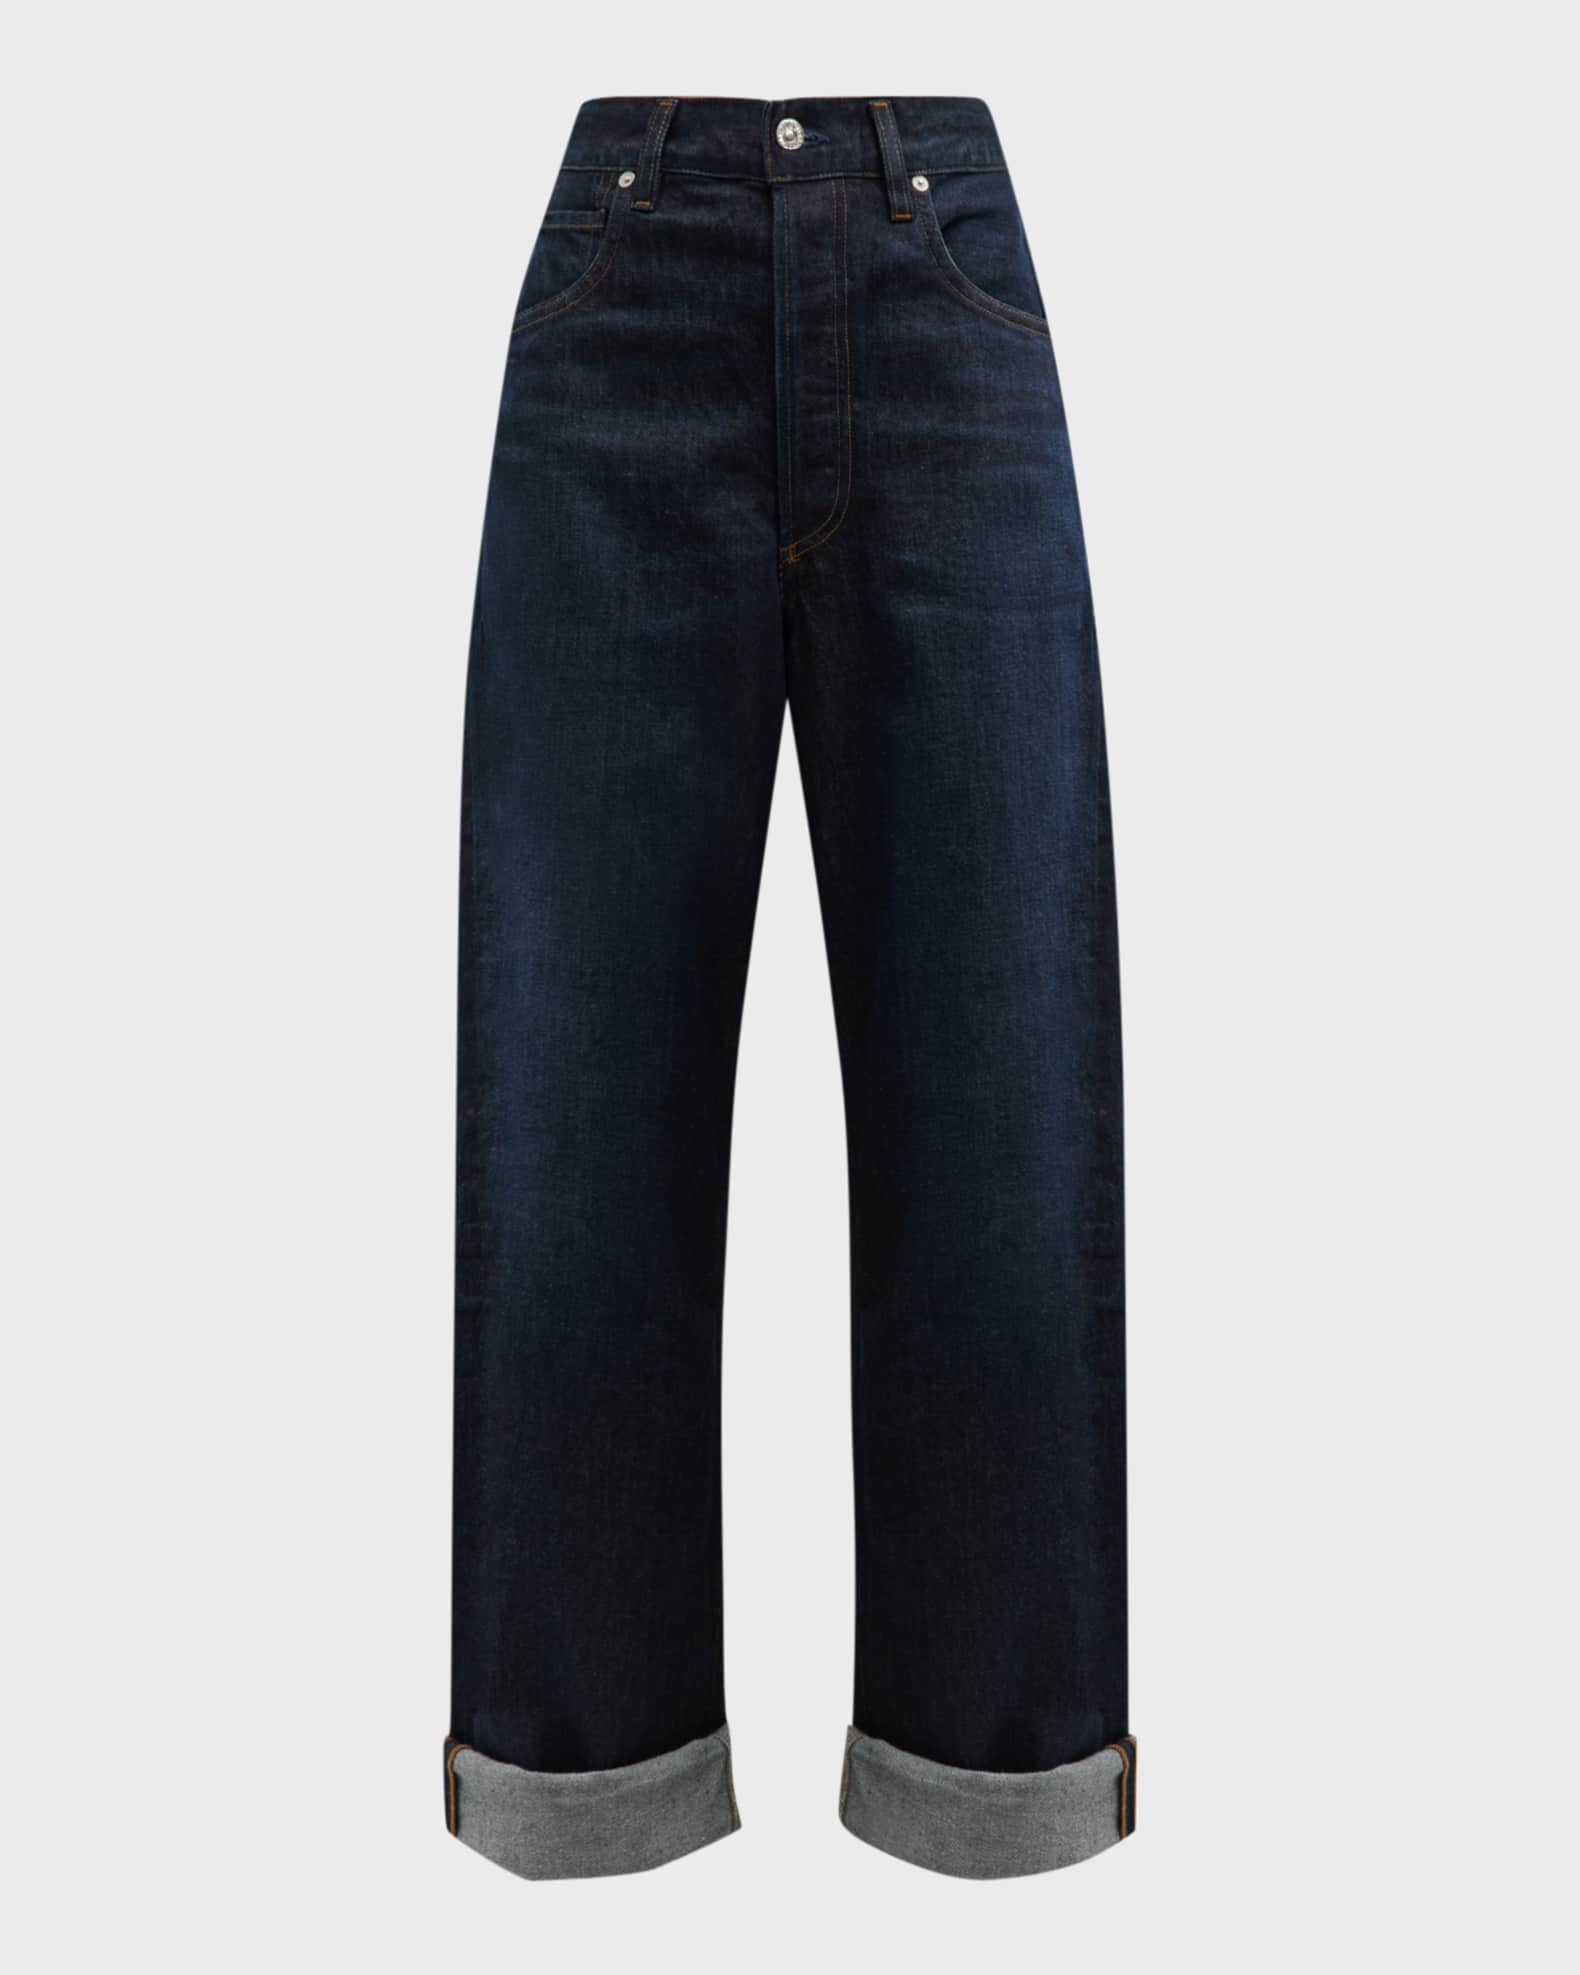 Ayla Baggy Cuffed Ankle Jeans | Neiman Marcus